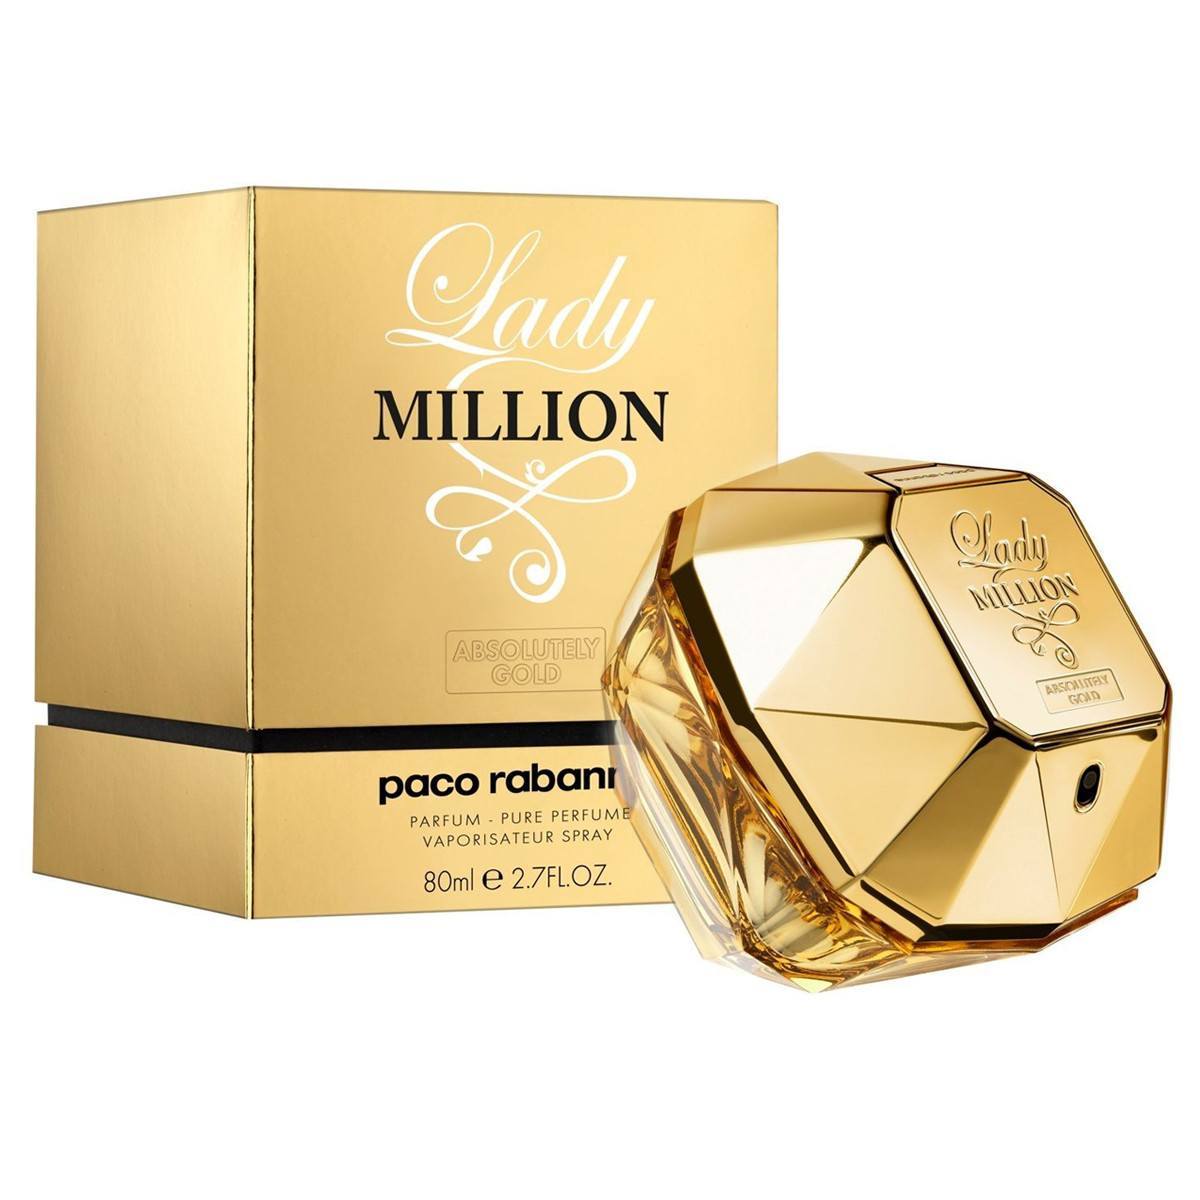 Lady Million Absolutely Gold 2.7 oz Pure Perfume for women ...